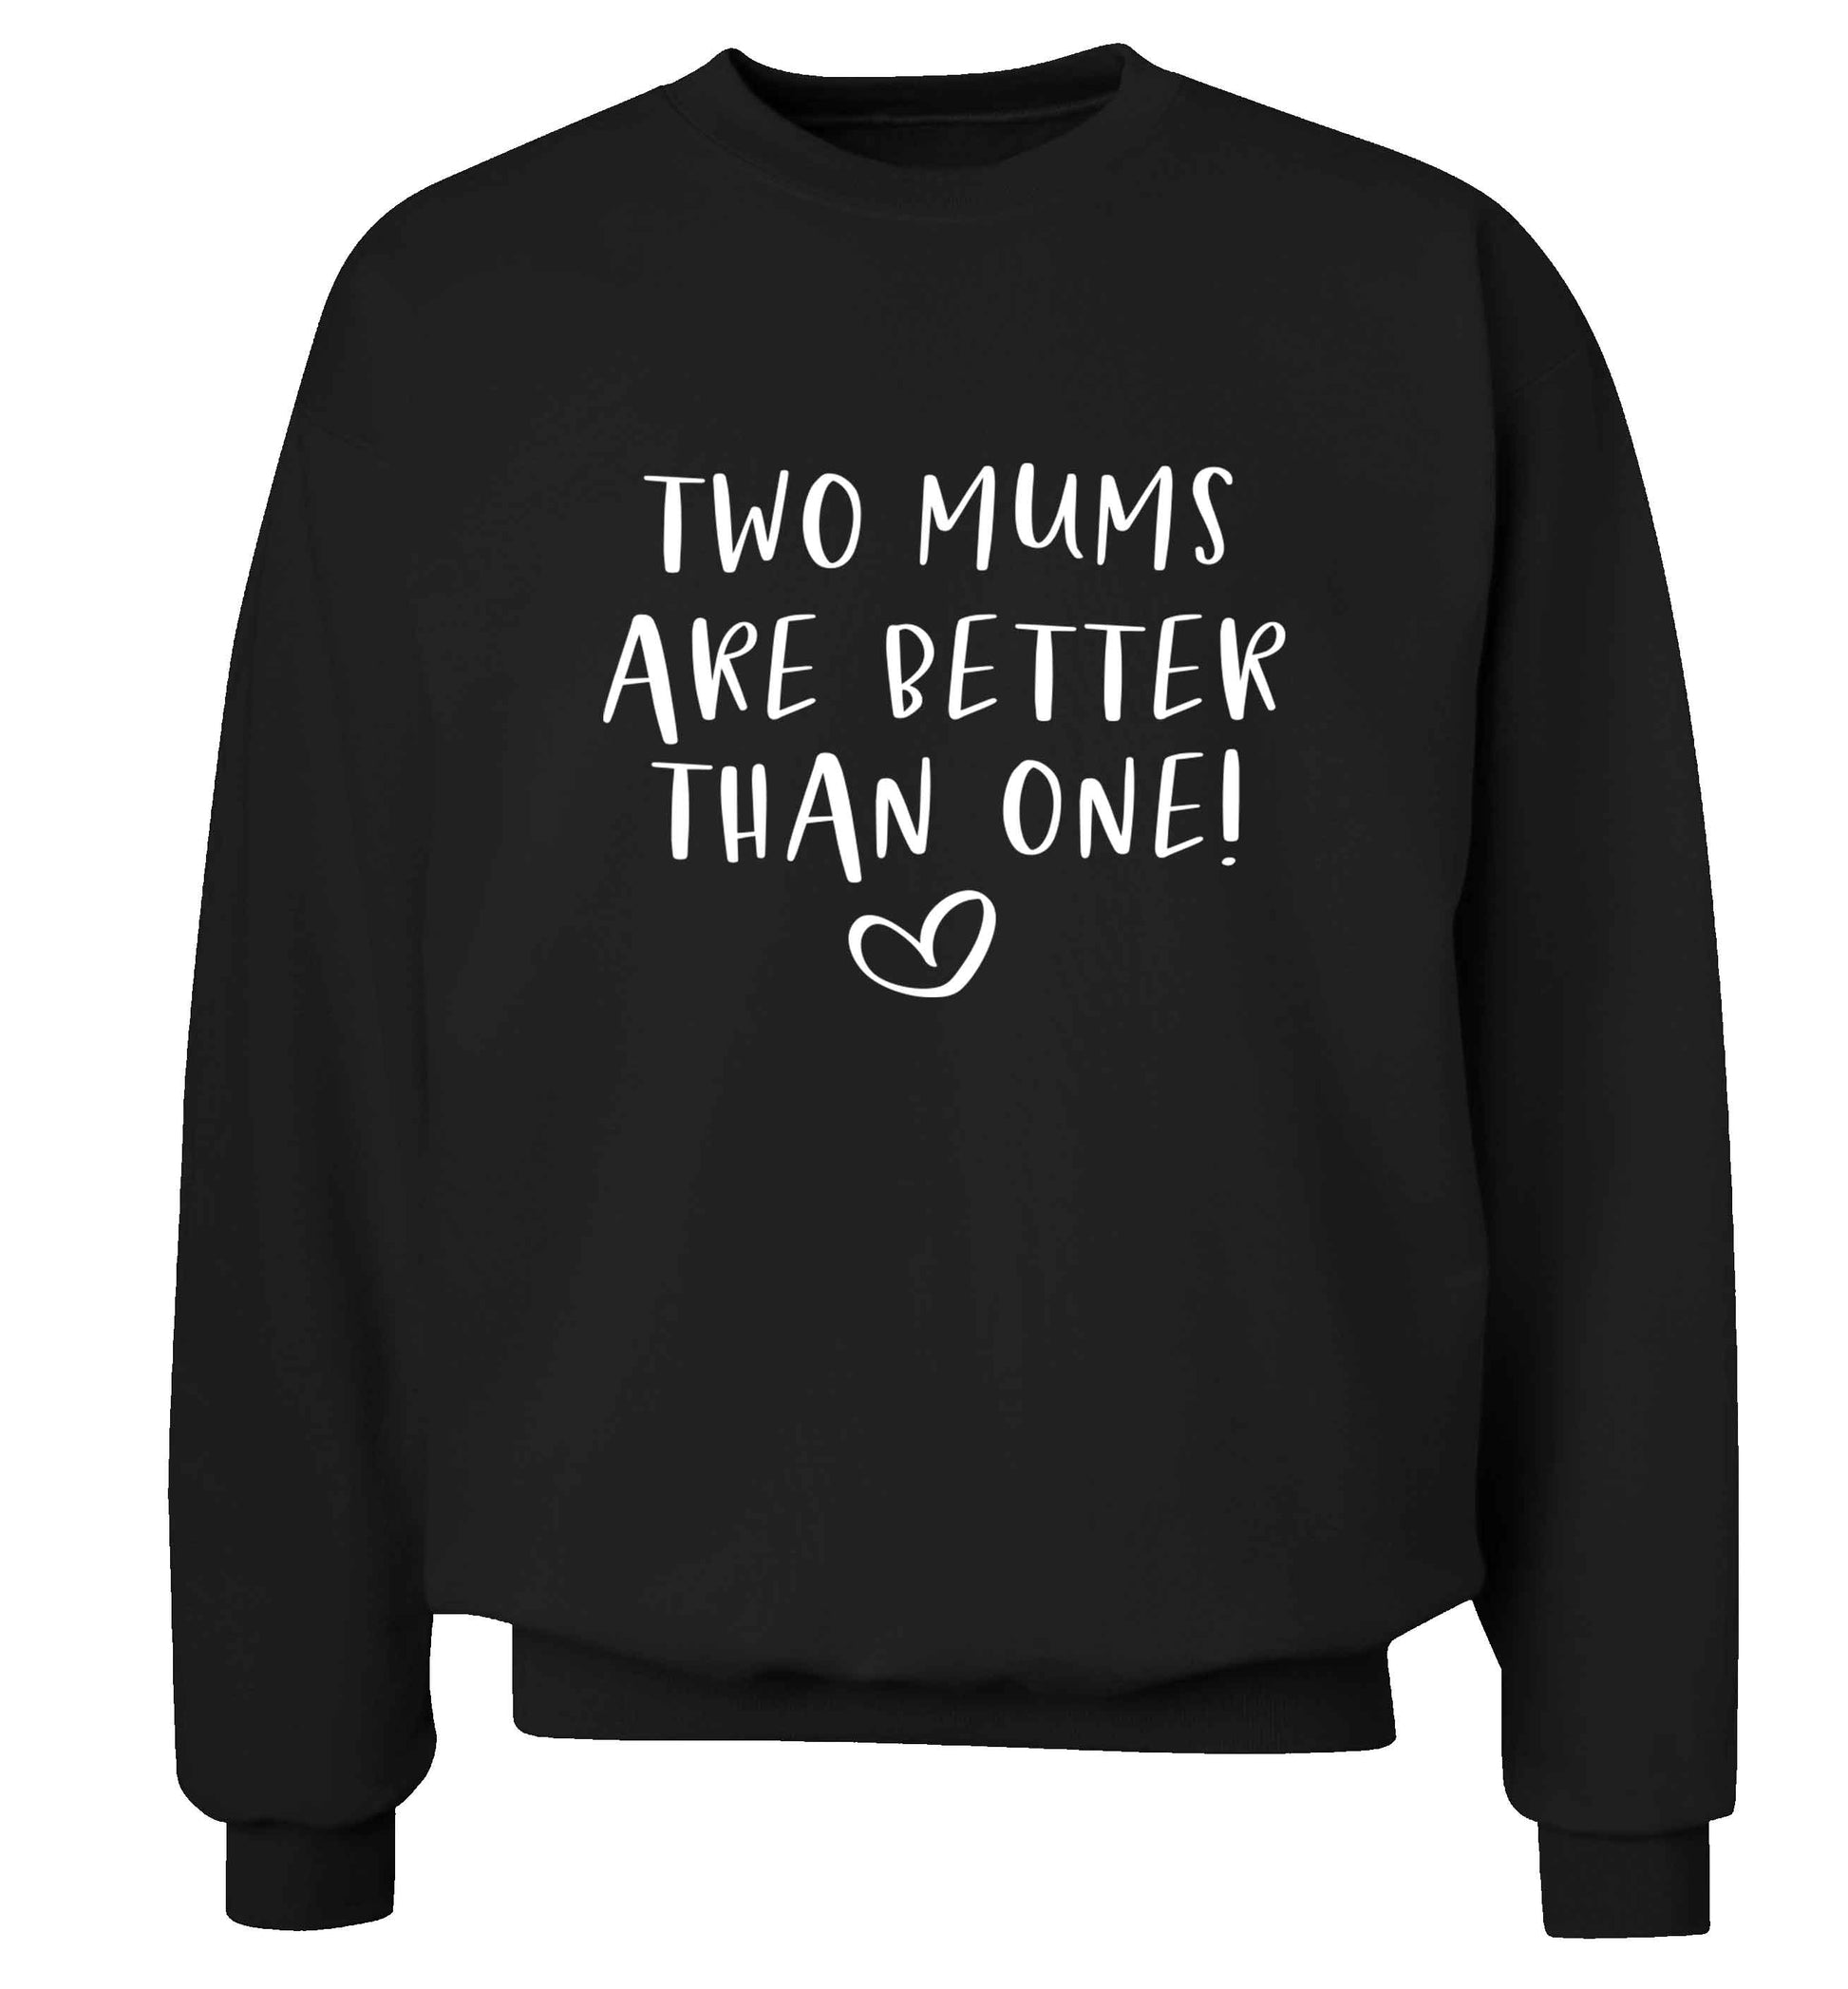 Two mums are better than one adult's unisex black sweater 2XL